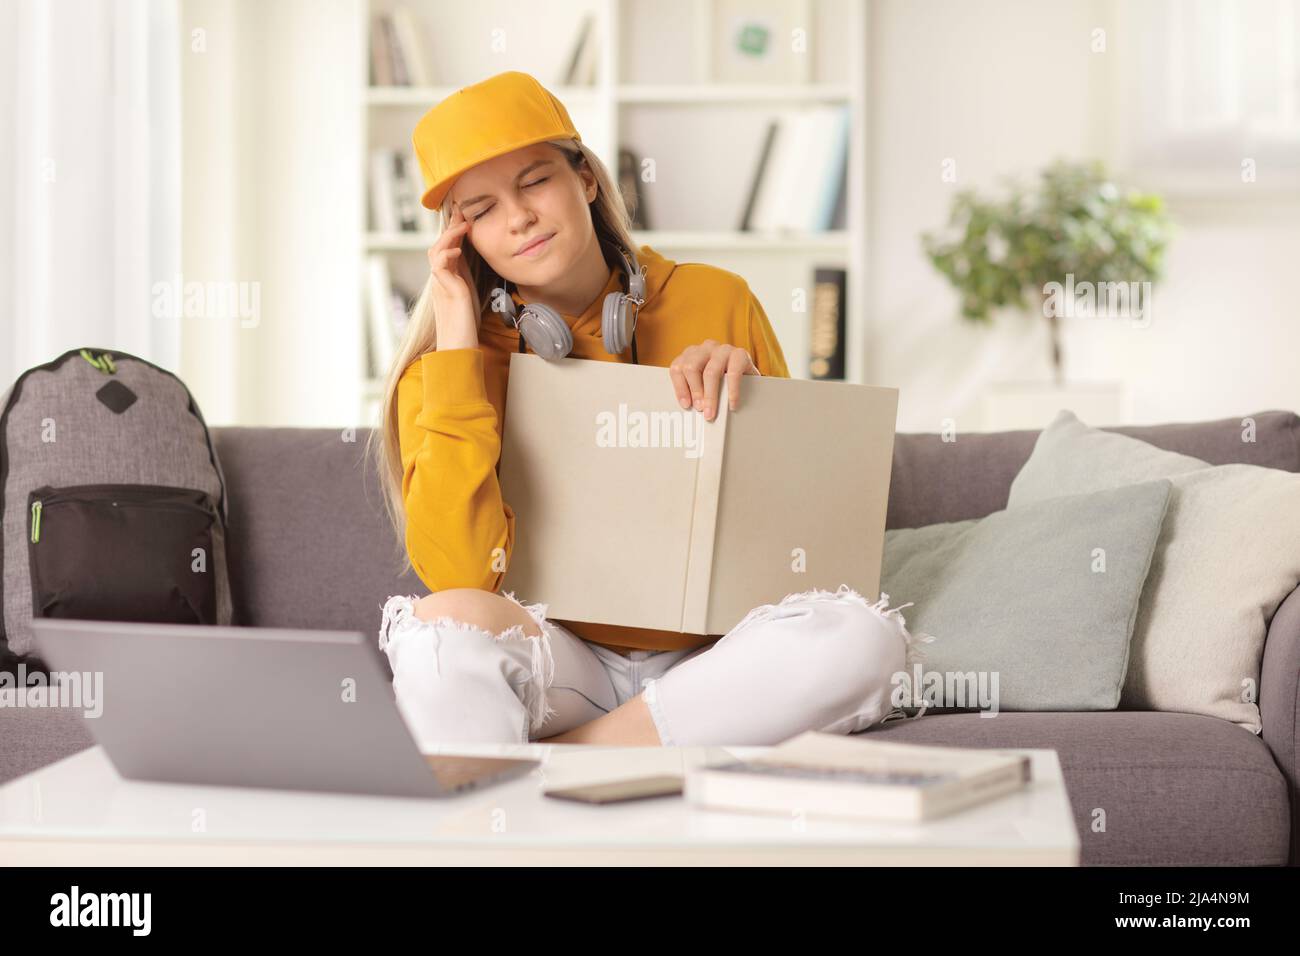 Young female studying on a sofa at home with a book trying to remember something Stock Photo